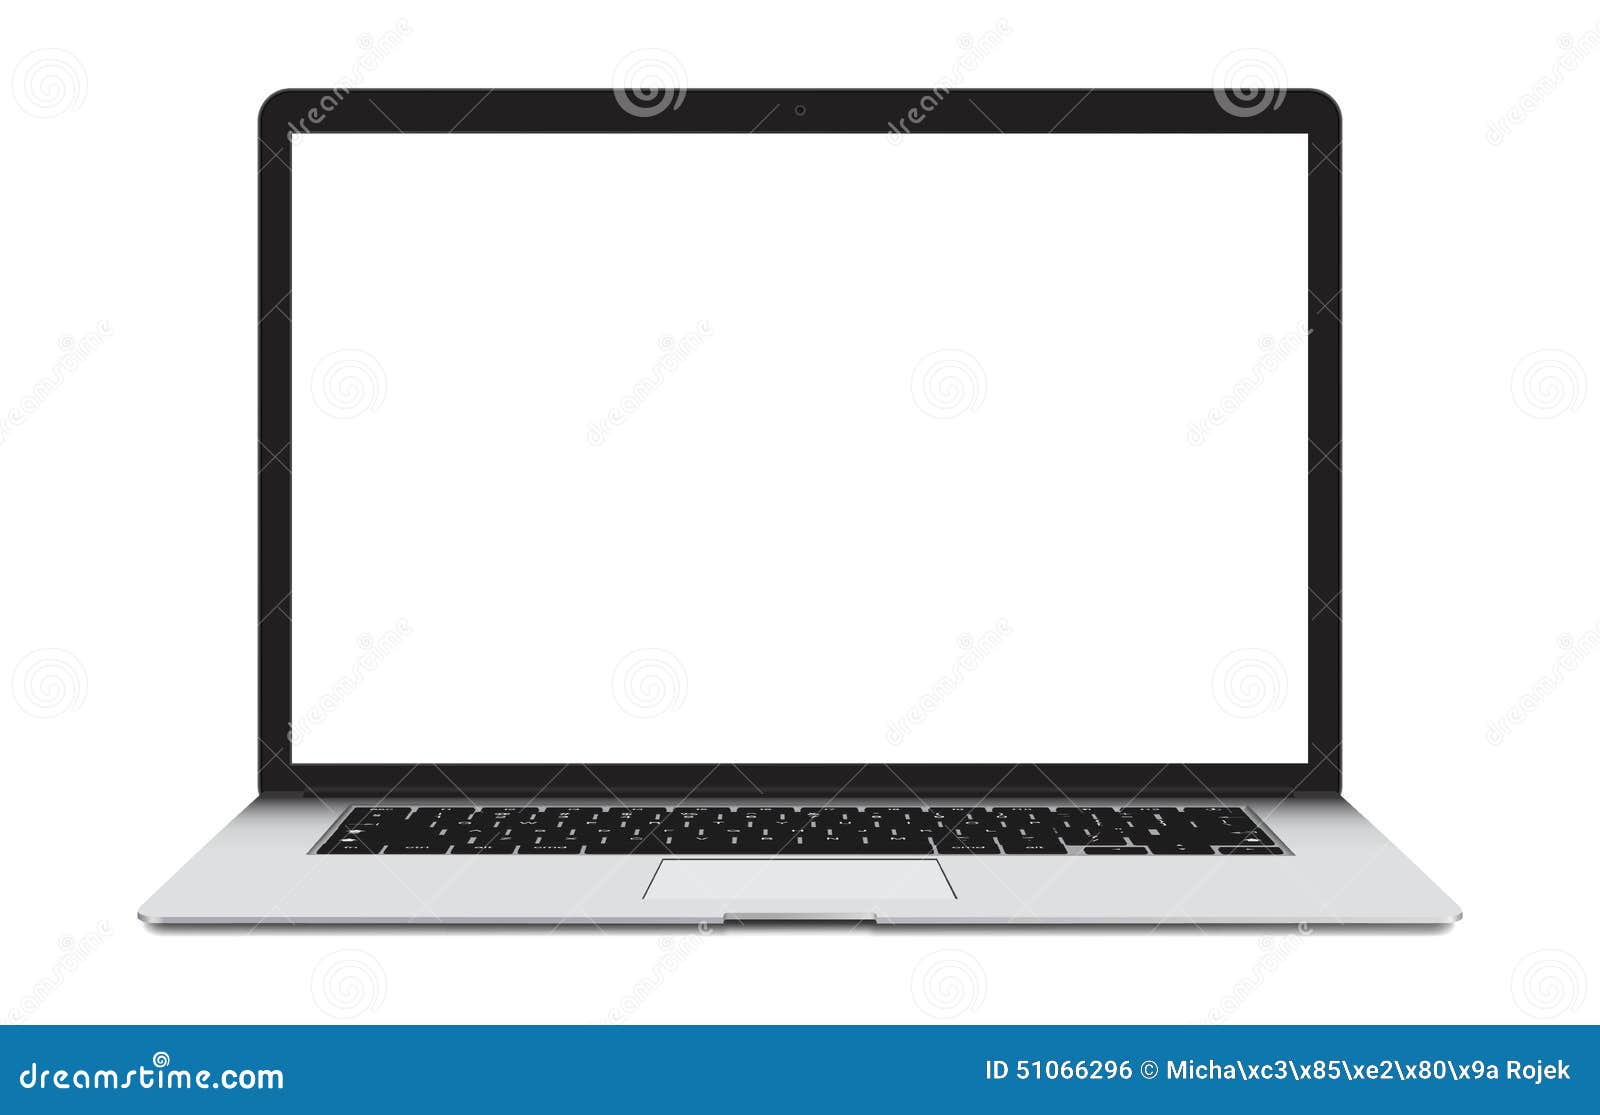 laptop with blank screen  on white.